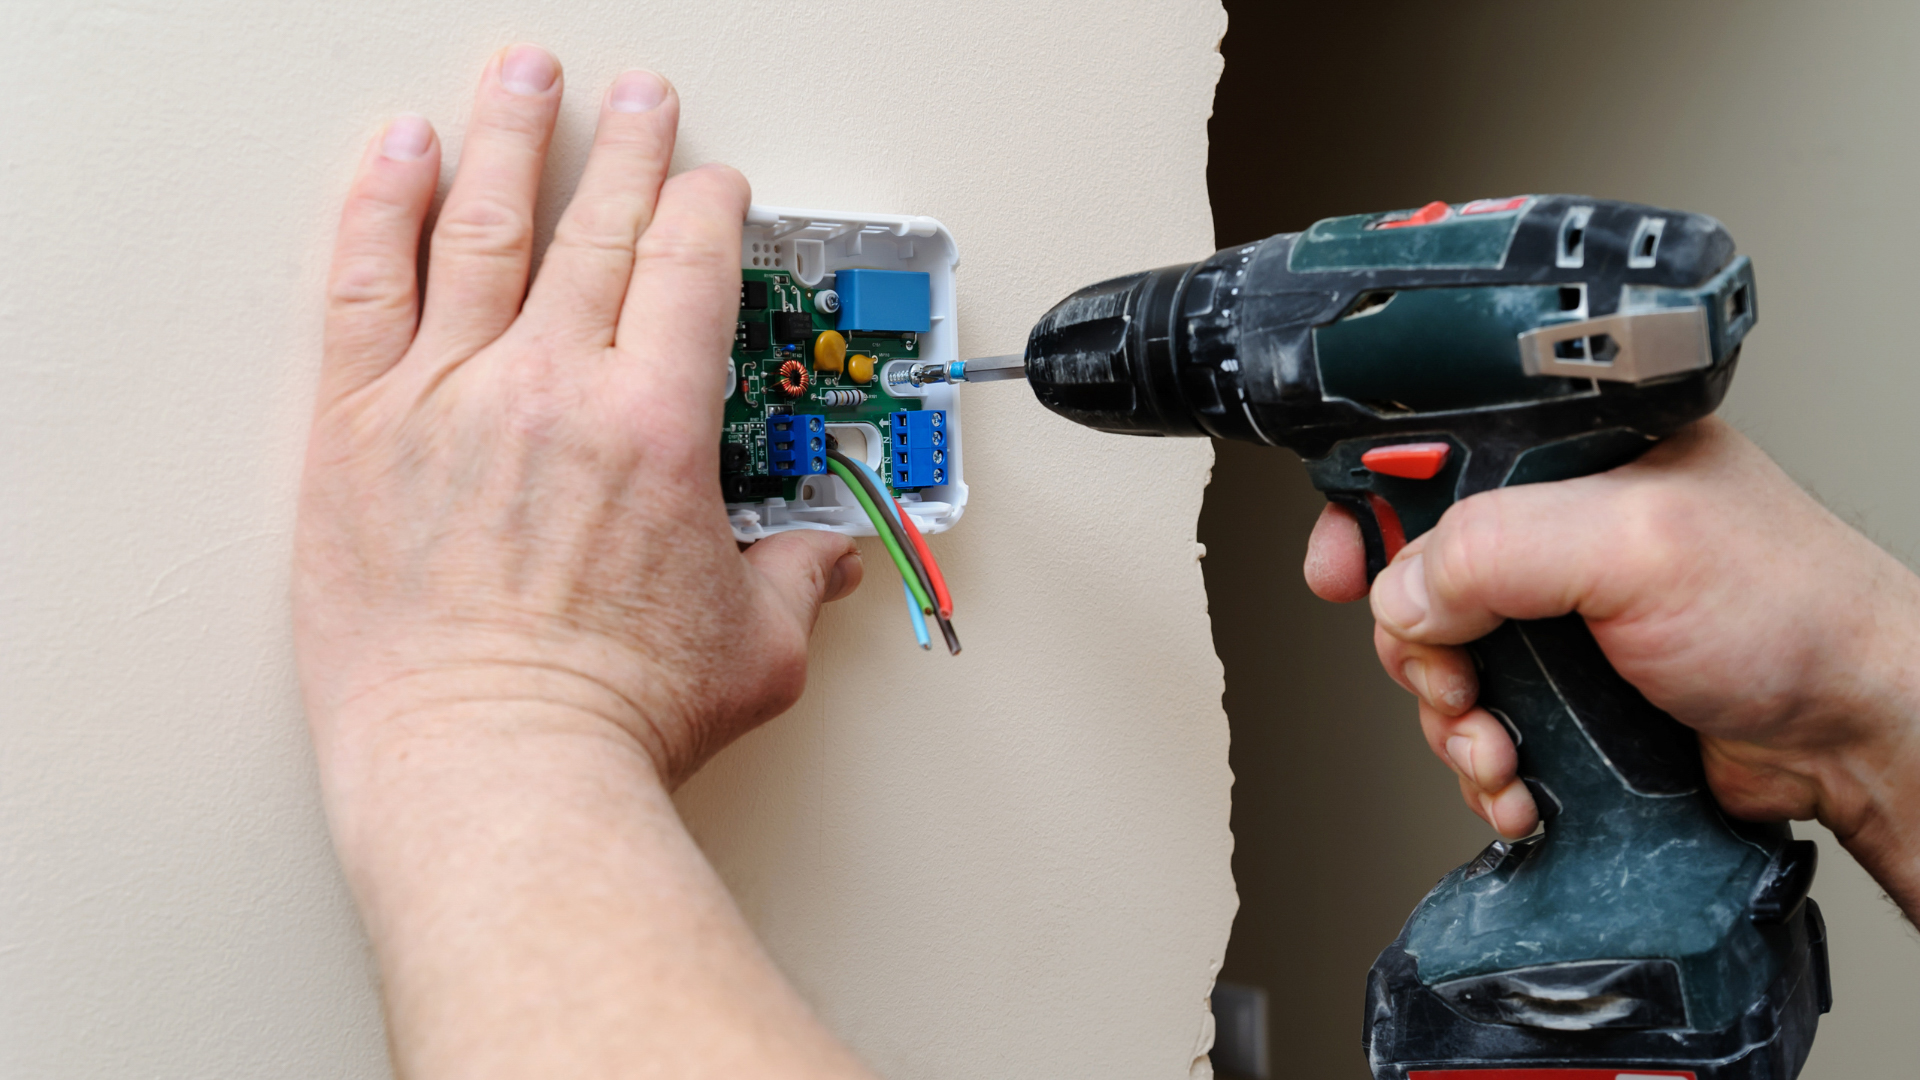 Thermostat Installation & Repair in Charleston, SC from Fix-it 24/7 Air Conditioning, Plumbing & Heating